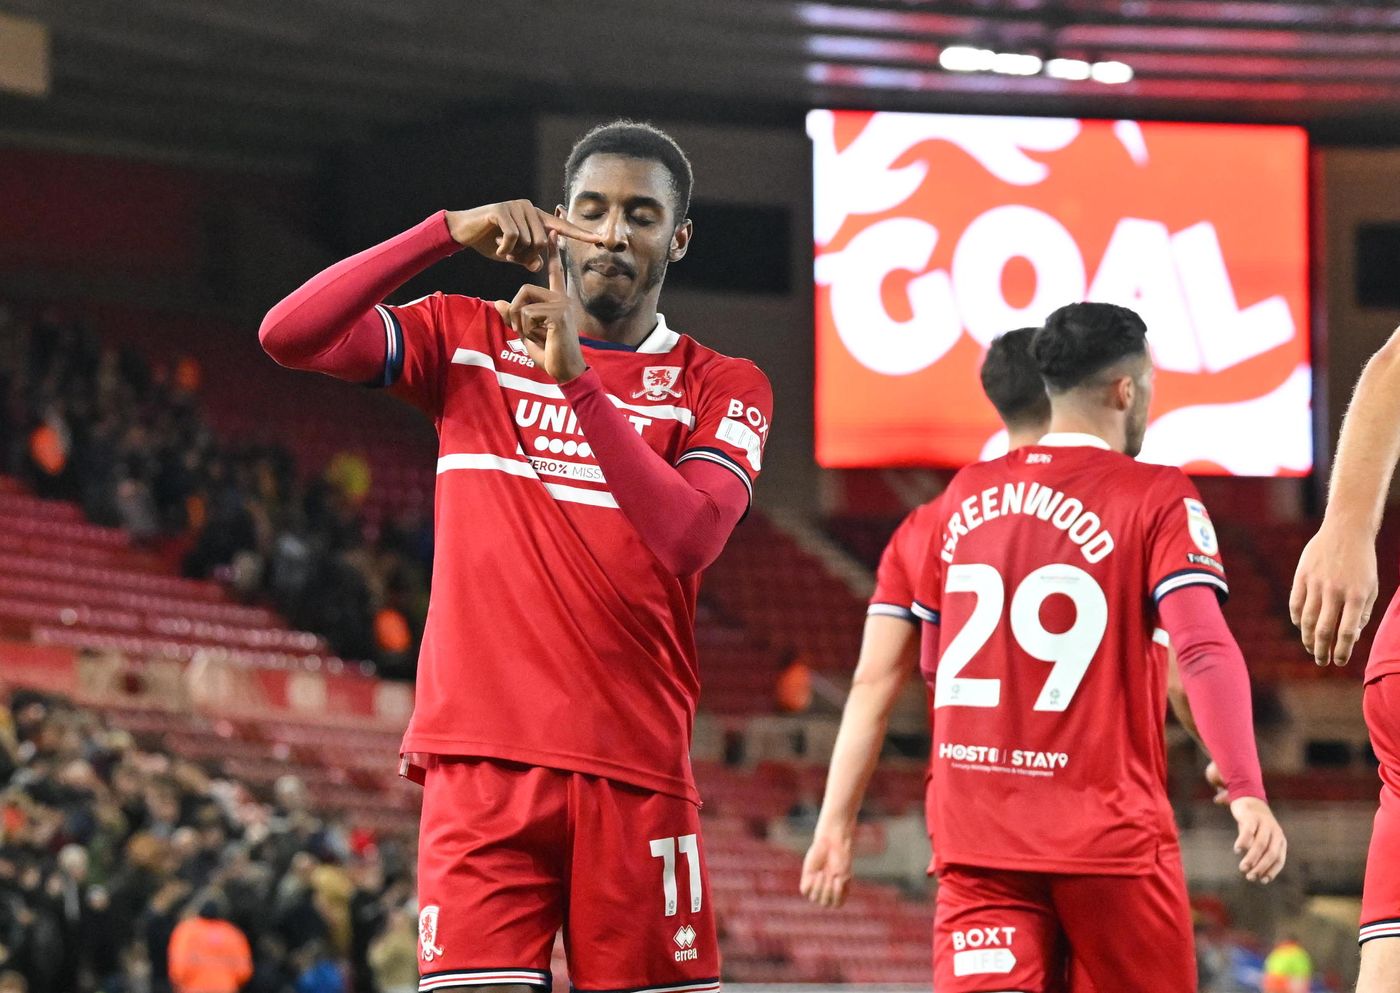 Middlesbrough 2-0 Cardiff City Highlights as Boro make it three league wins  in a row - Teesside Live